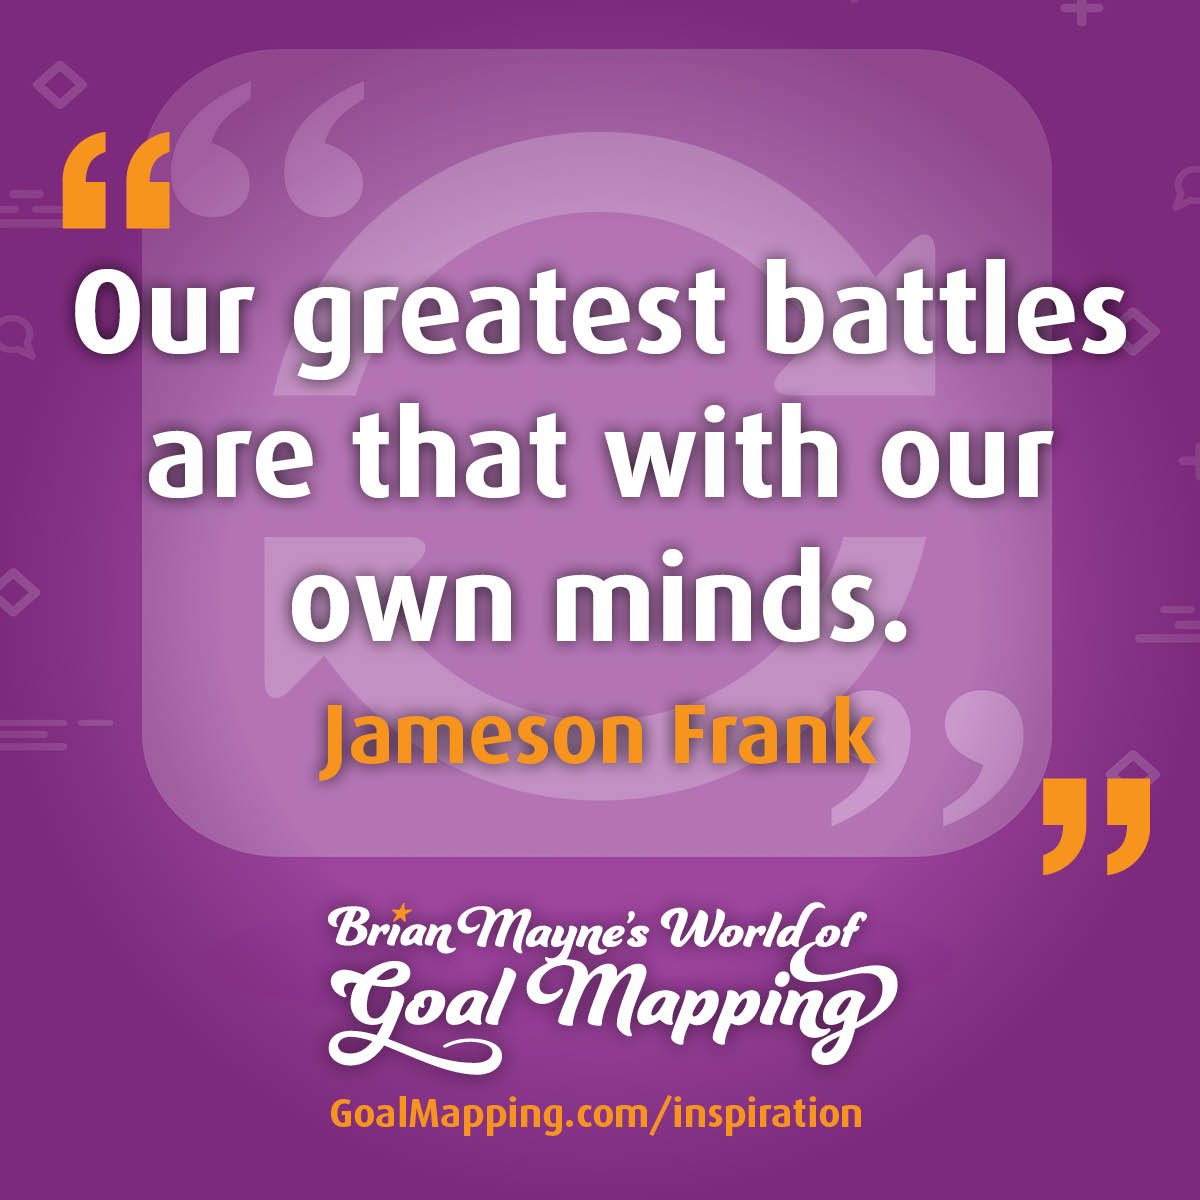 "Our greatest battles are that with our own minds." Jameson Frank